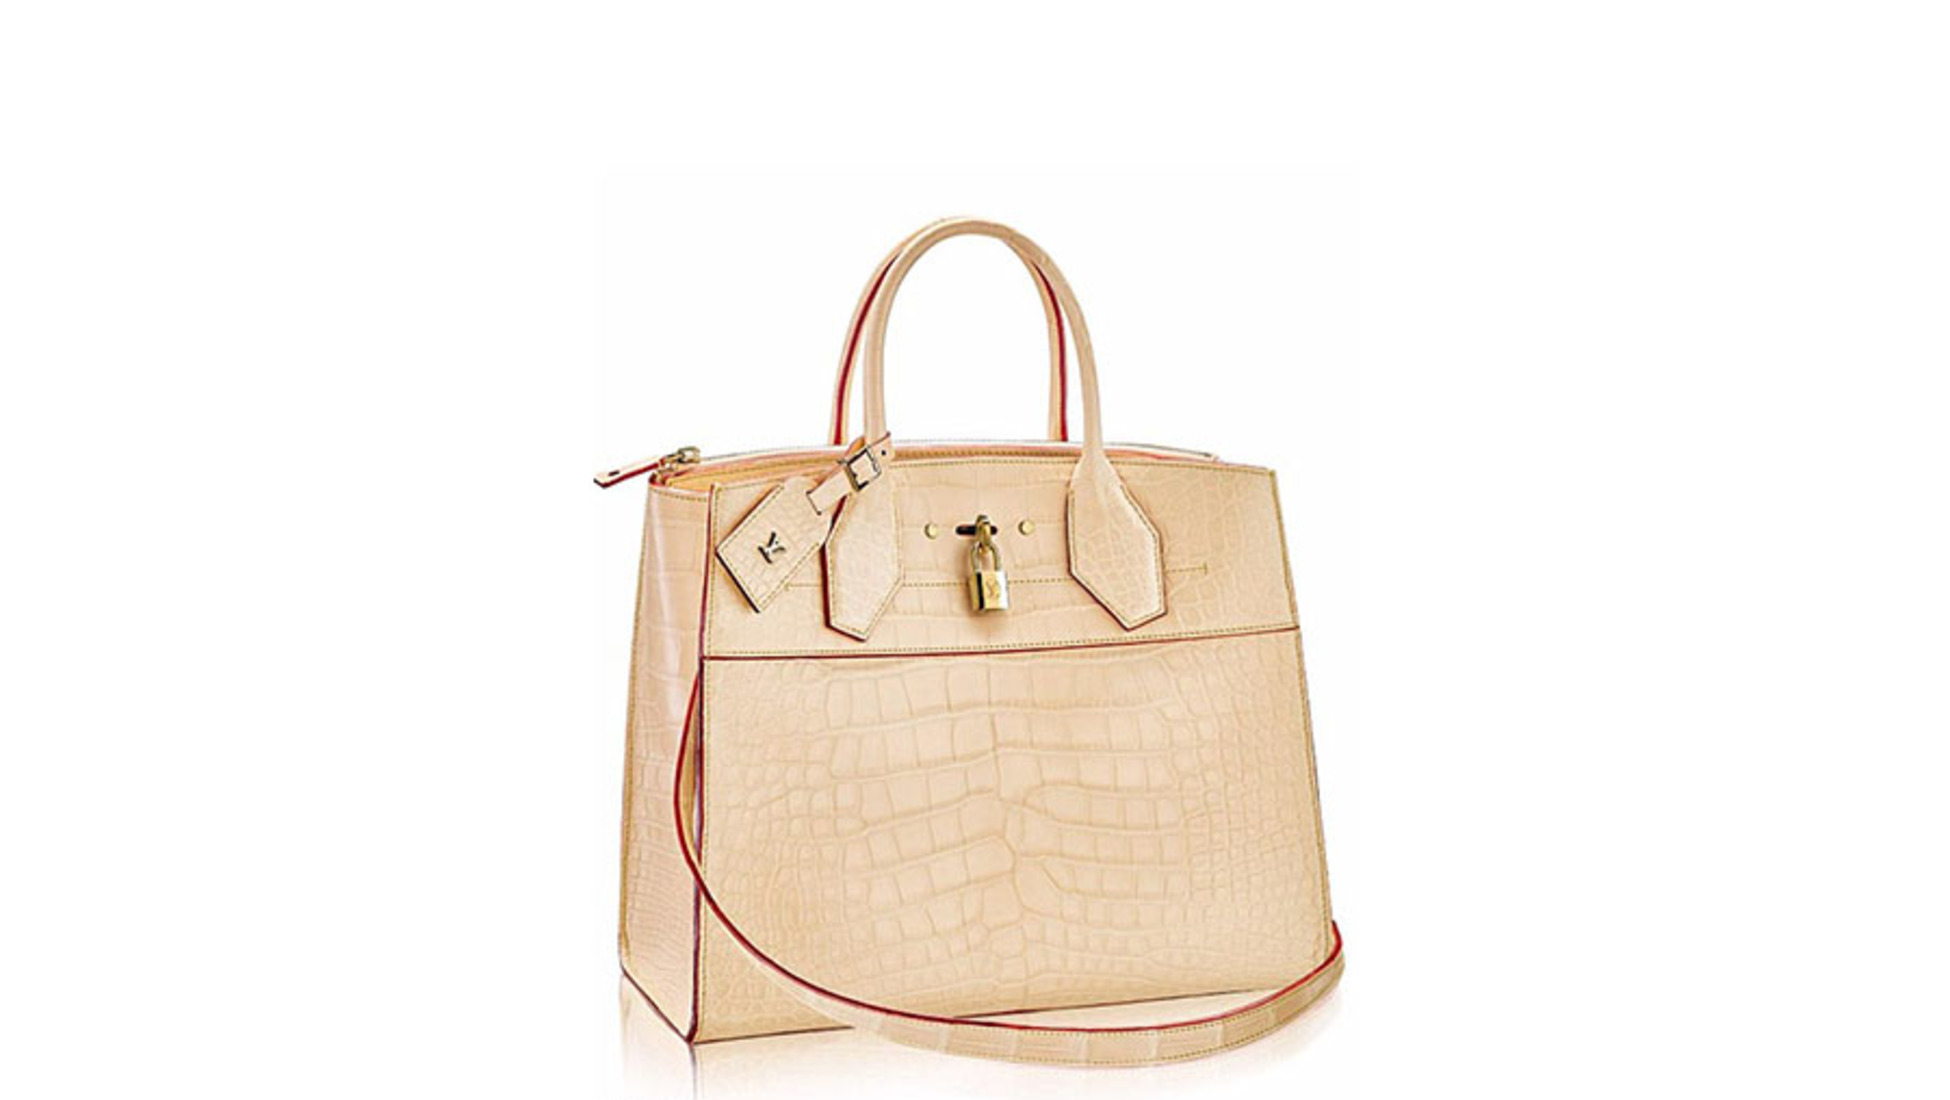 5 most expensive bags by Louis Vuitton